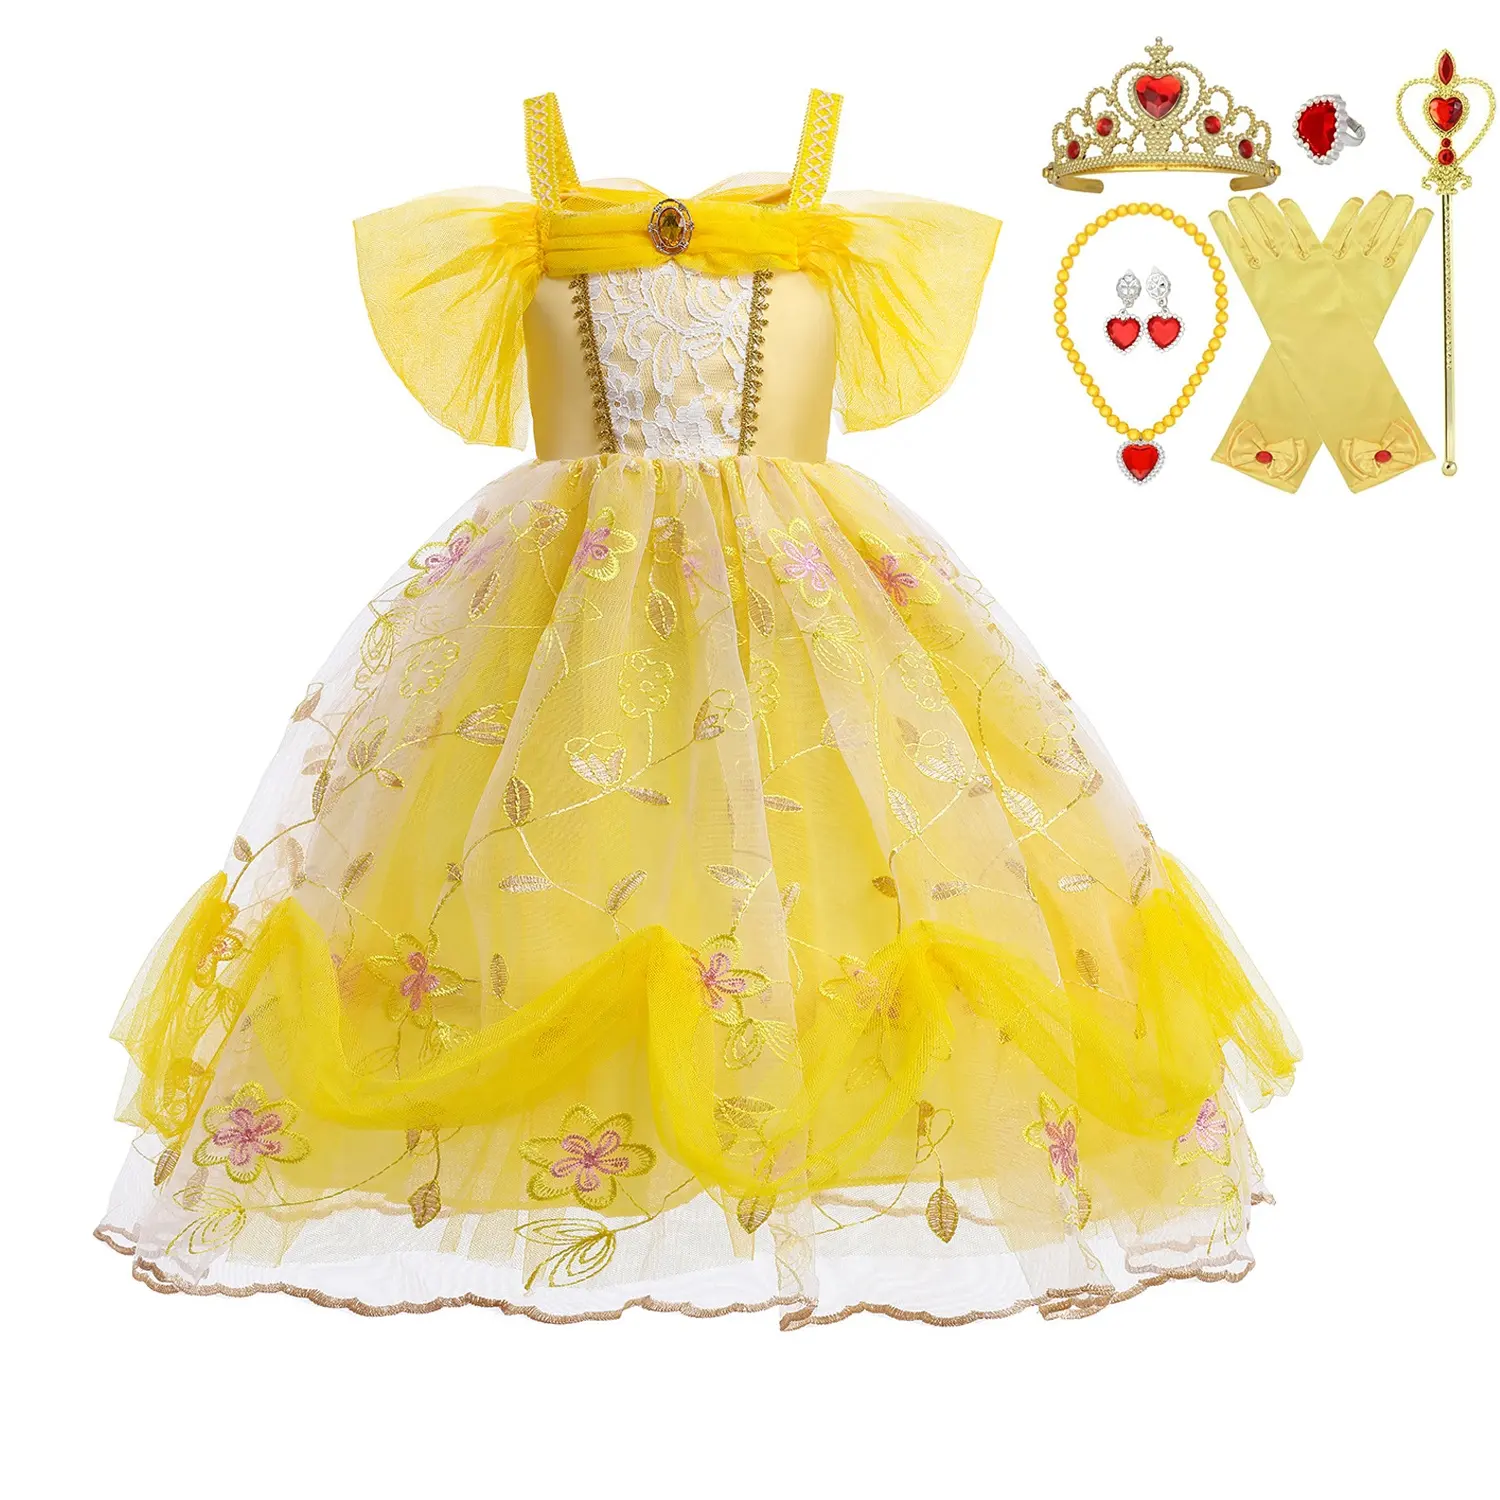 Wholesale Halloween Kids Princess Dresses Cosplay Costume For Kids Girls Party Dress Up